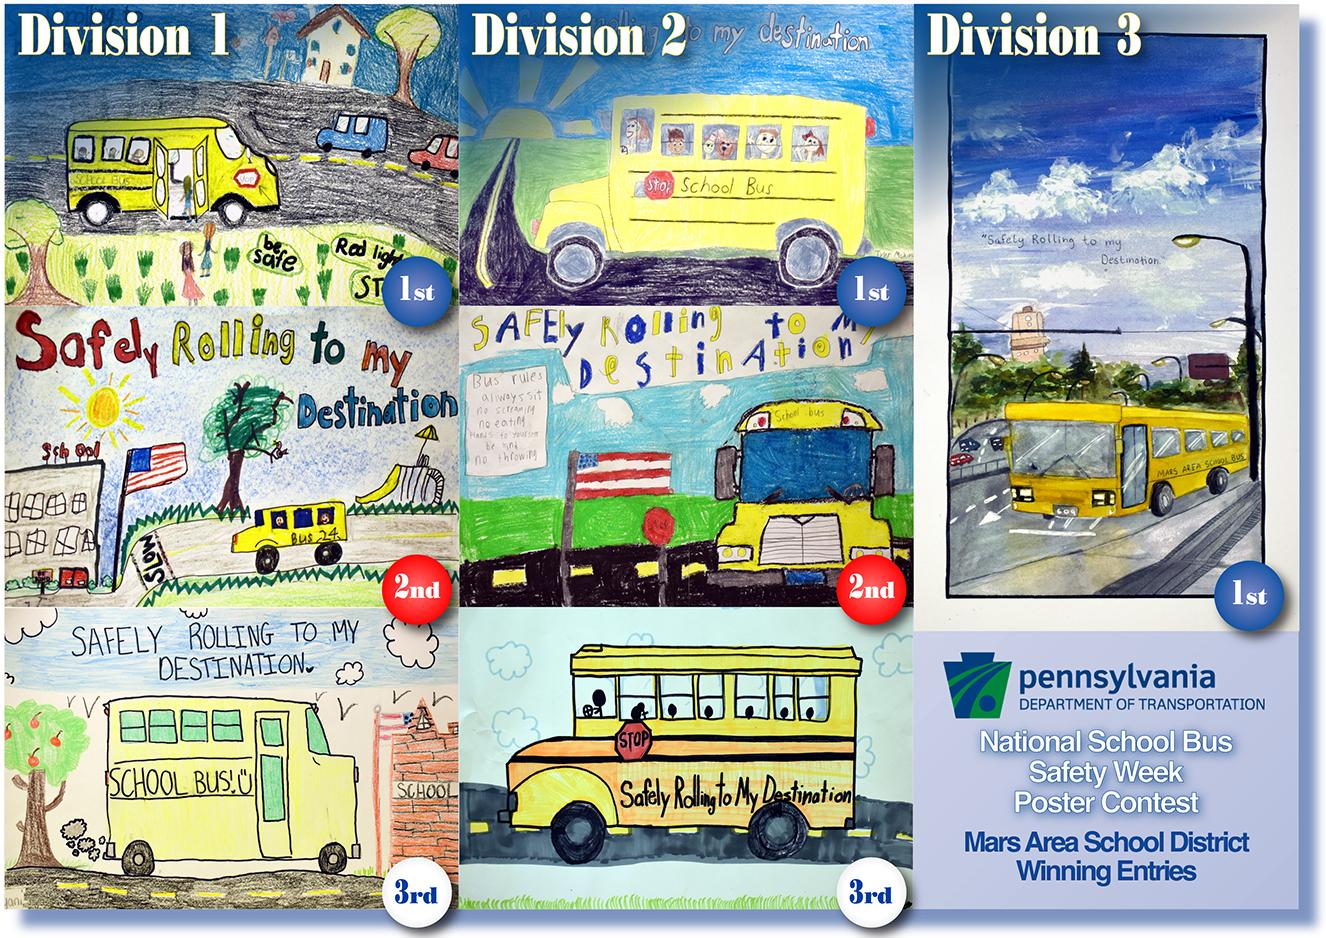 PennDOT Poster Contest